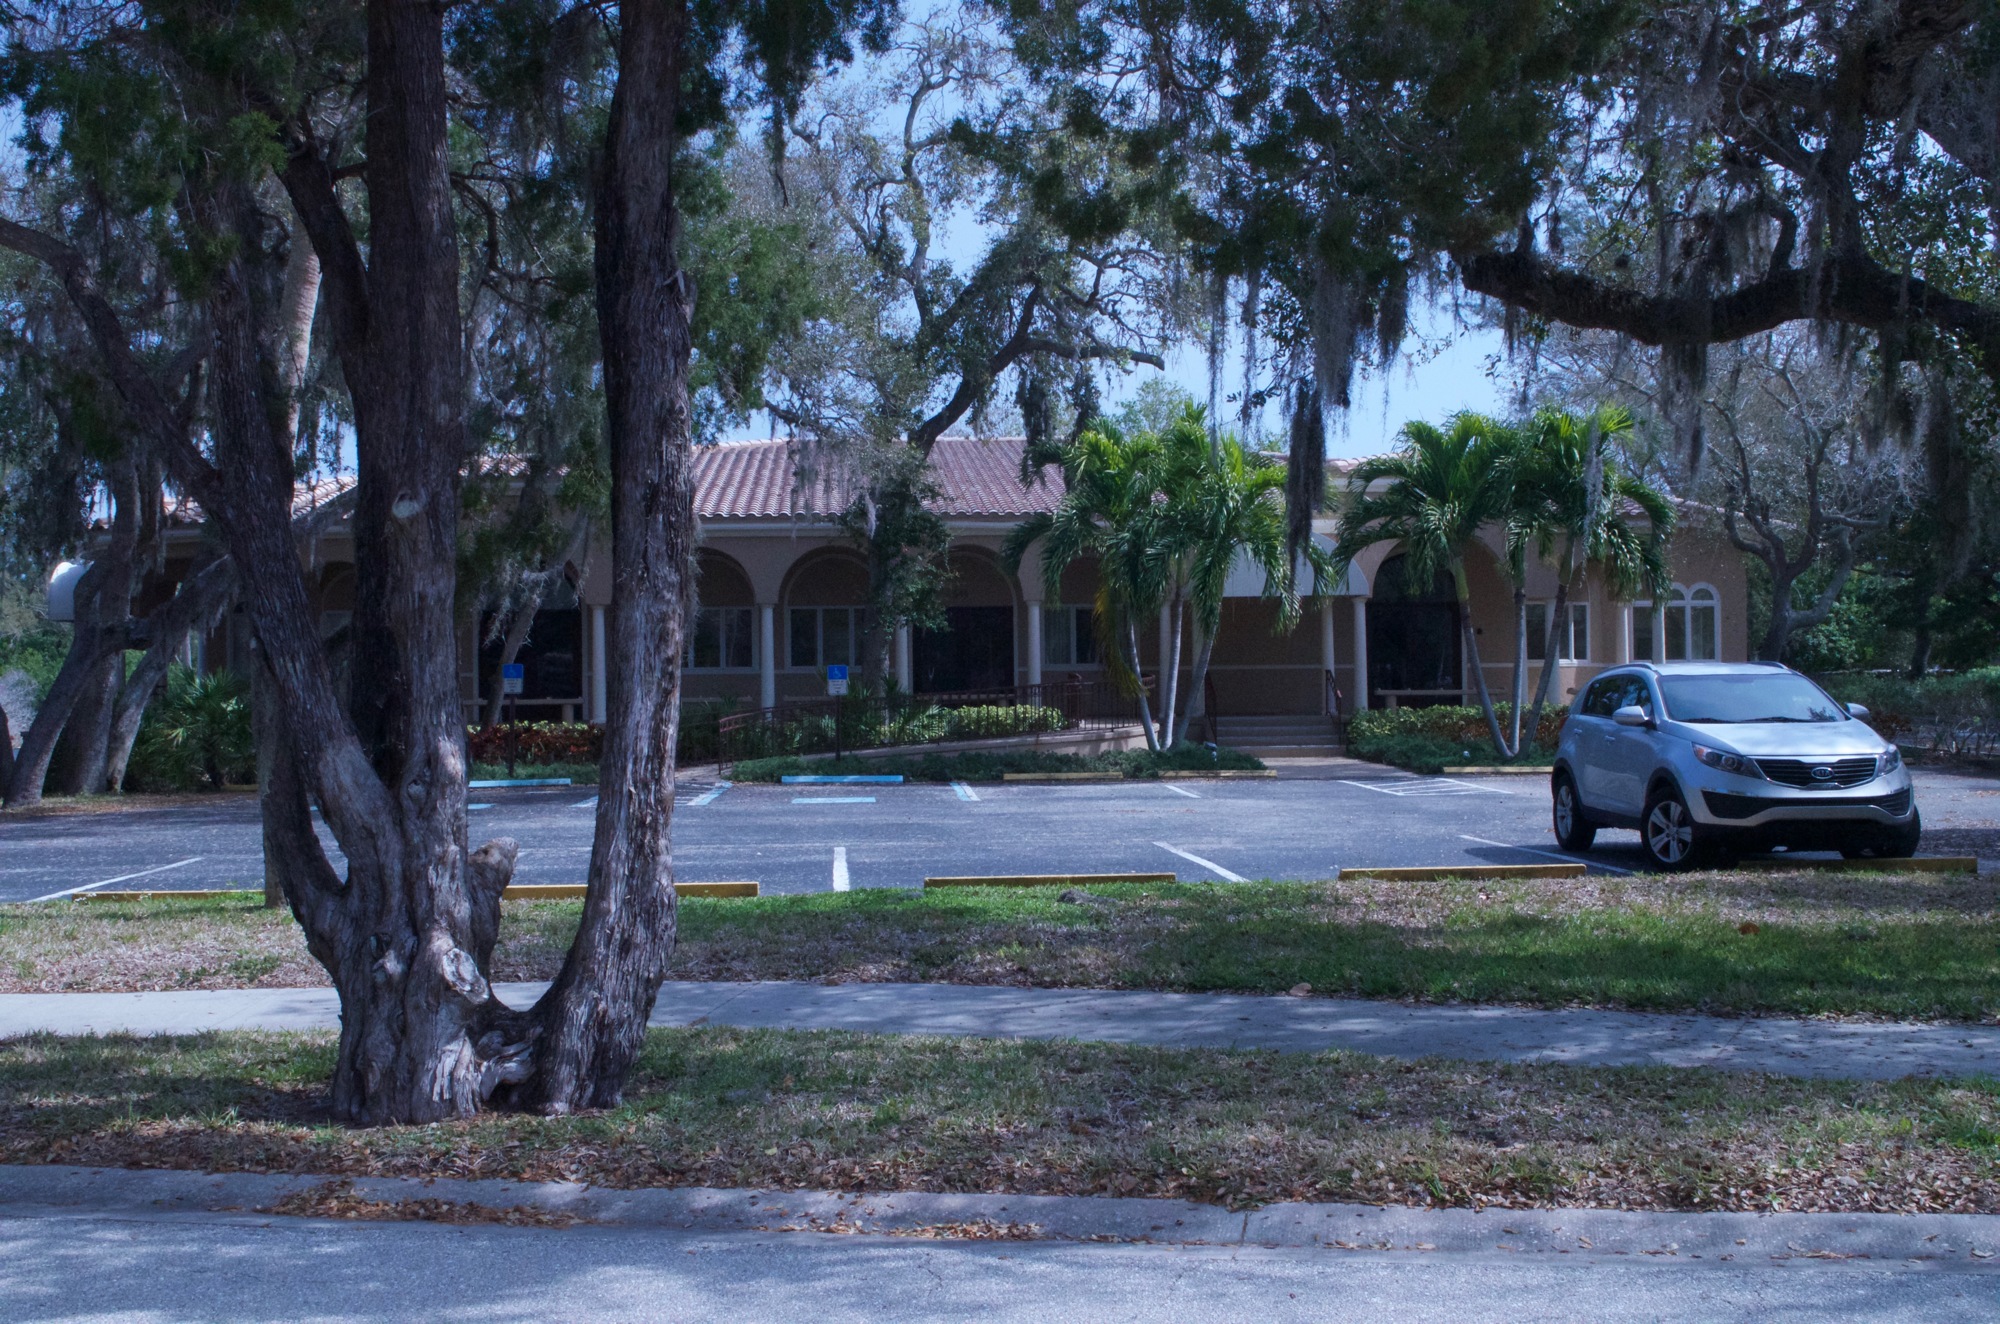 Northern Trust vacated its building at 540 Bay Isles Road in 2012 when it consolidated business in Sarasota.